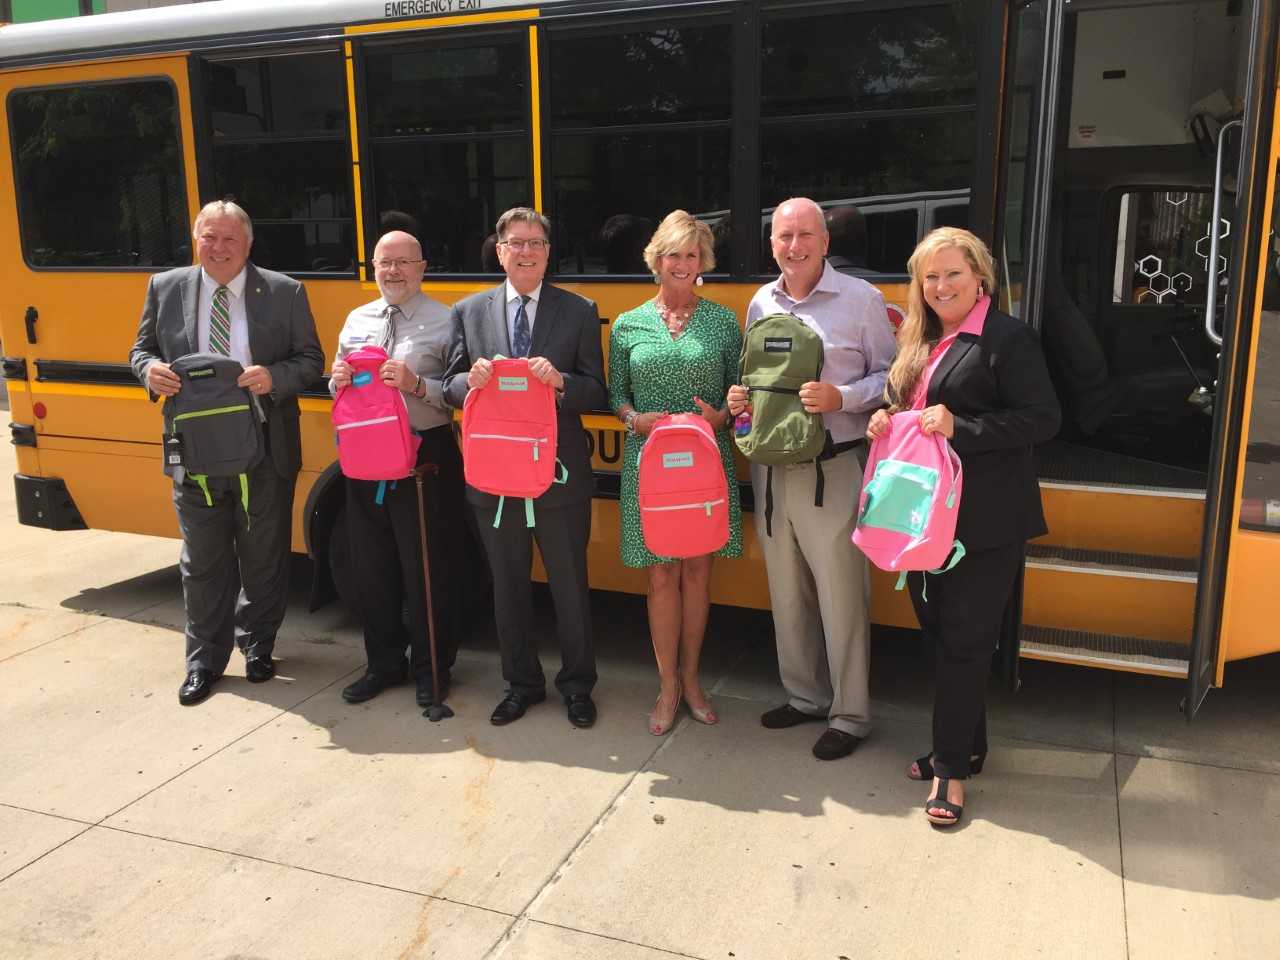 'Stuff the Bus' provides nearly 1,000 students with backpacks